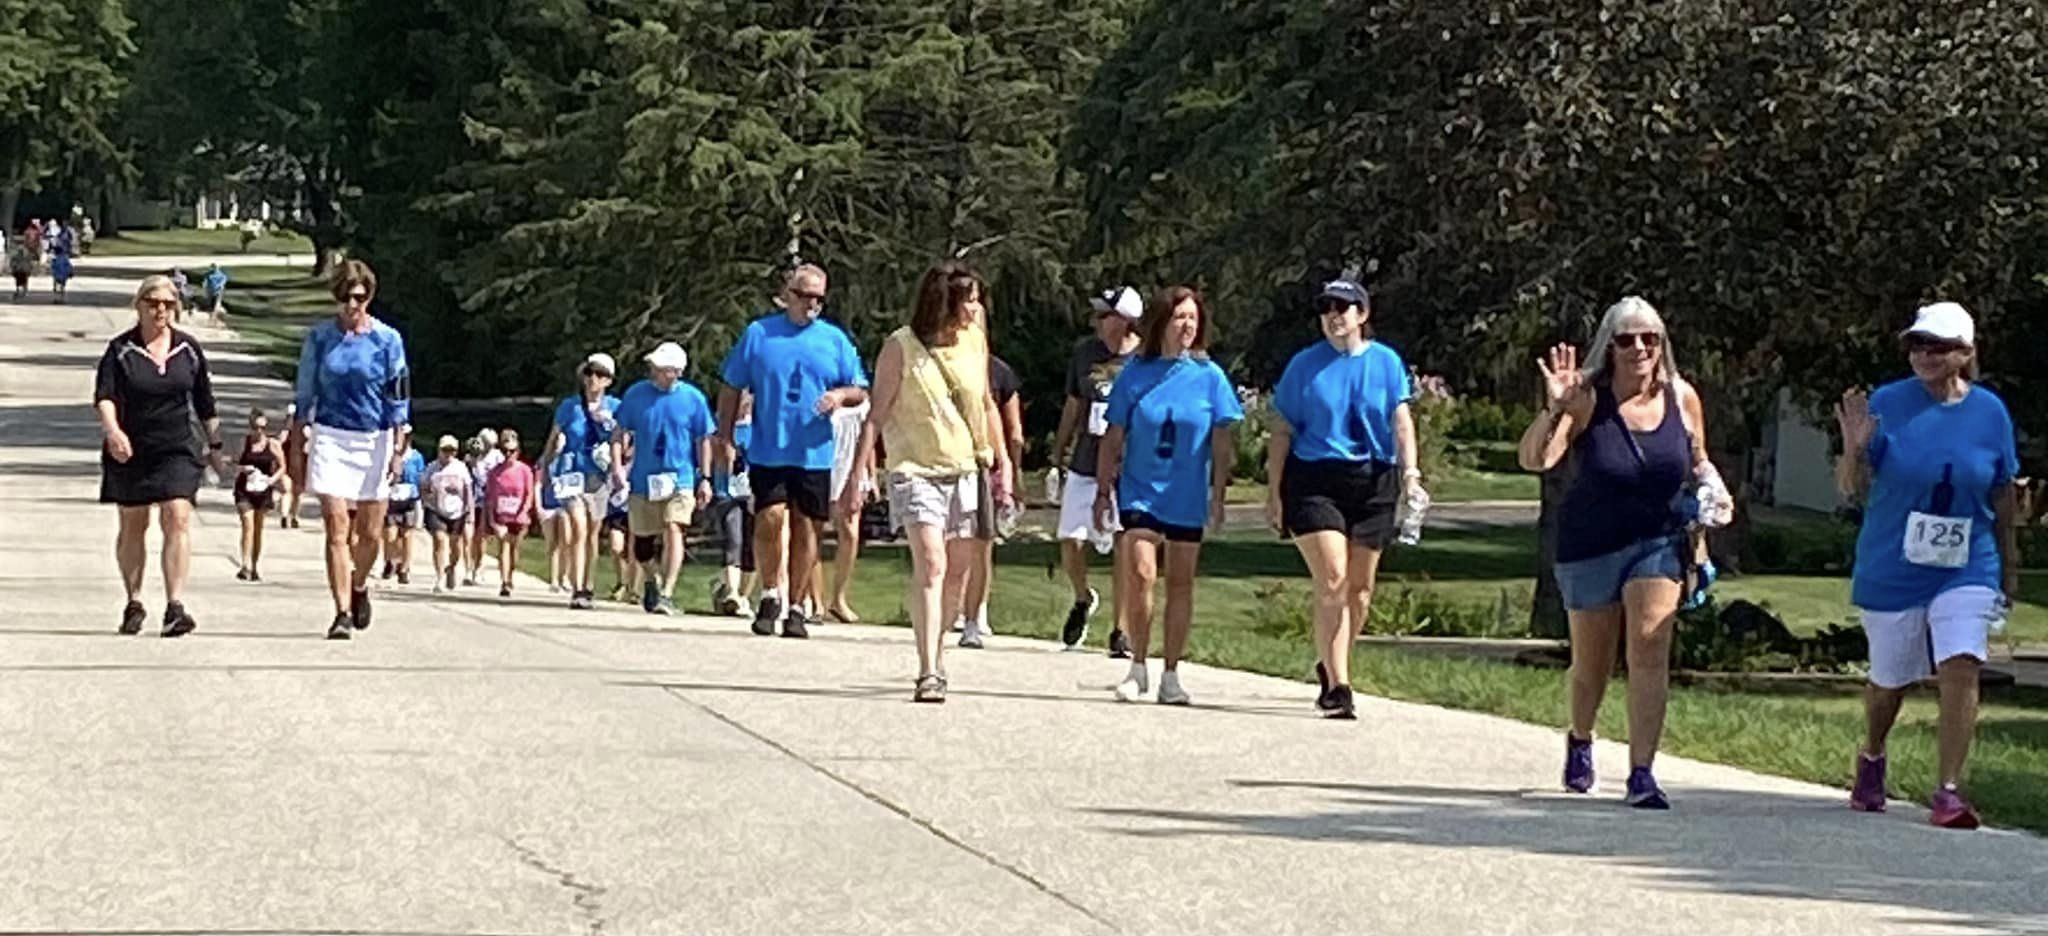 Gondola Bistro in Okauchee hosts run/walk for Blessings in a Backpack